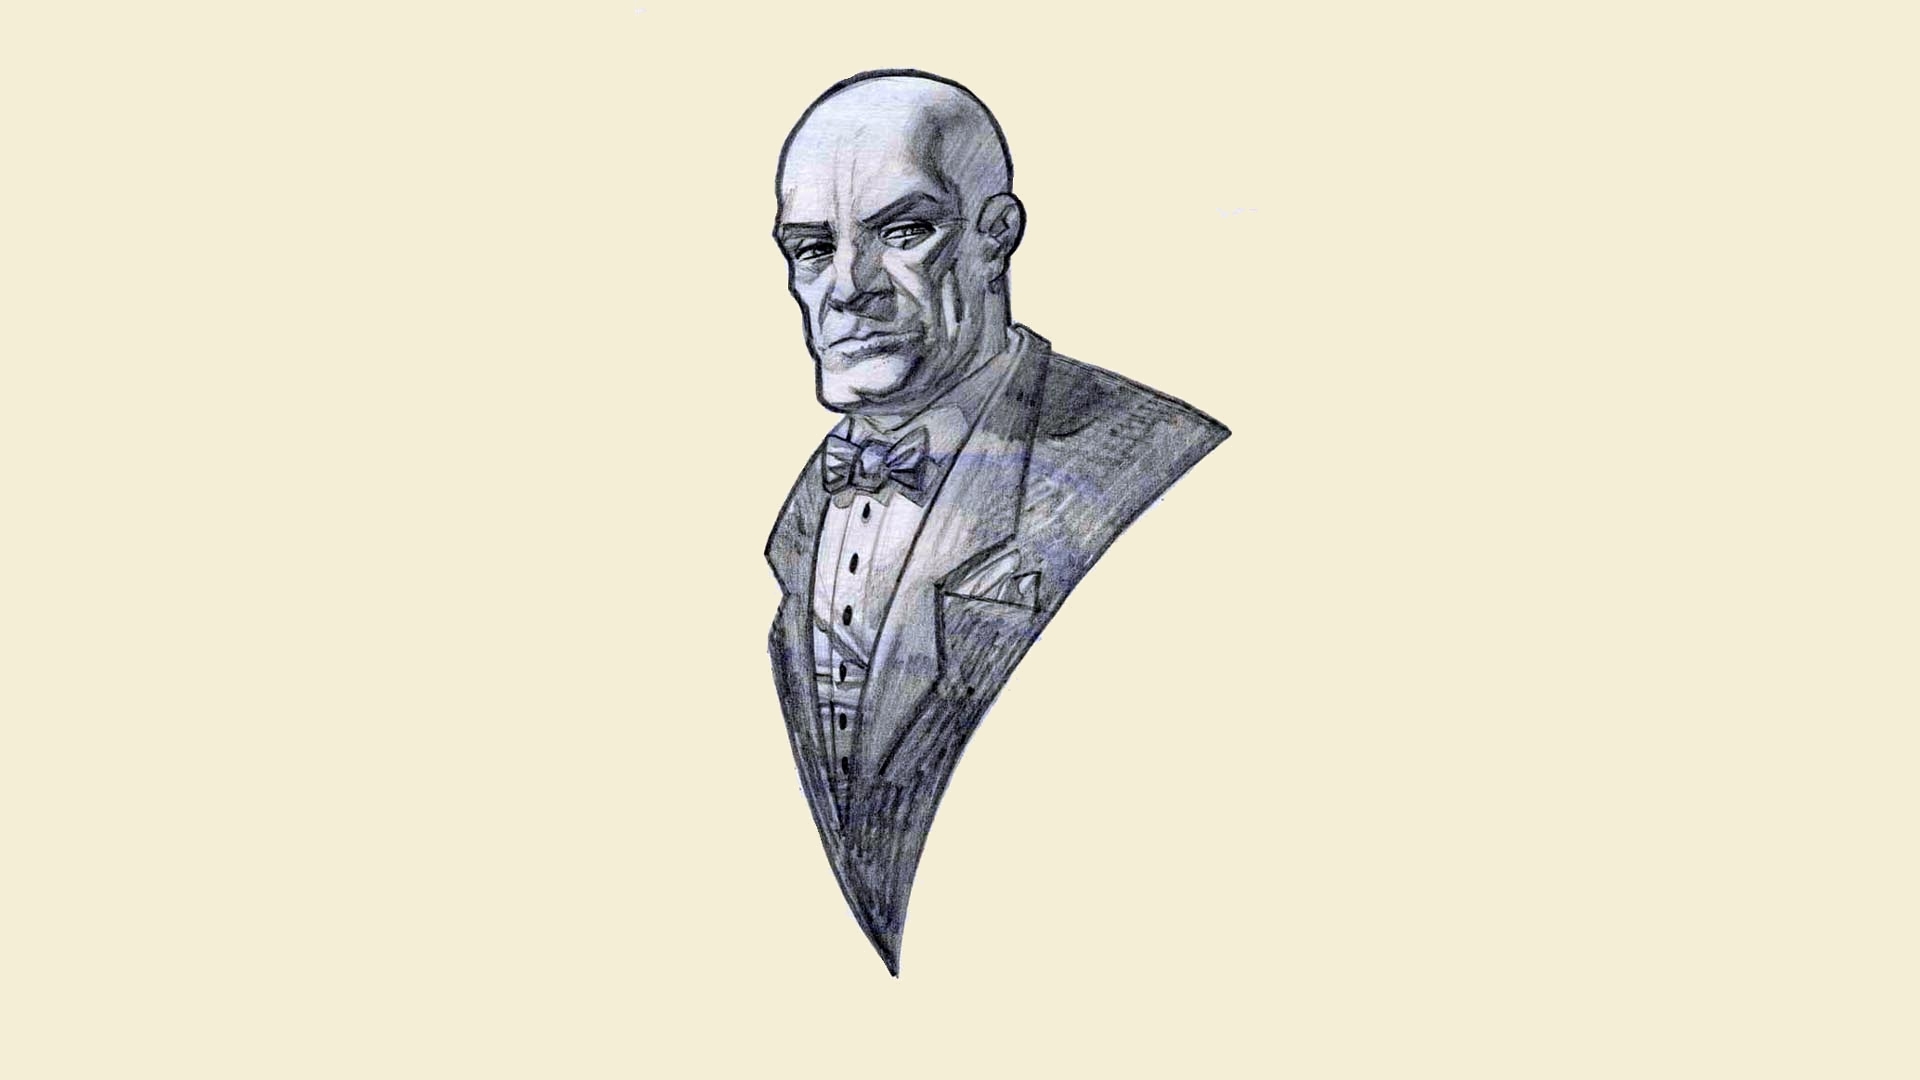 Lex Luthor Wallpapers